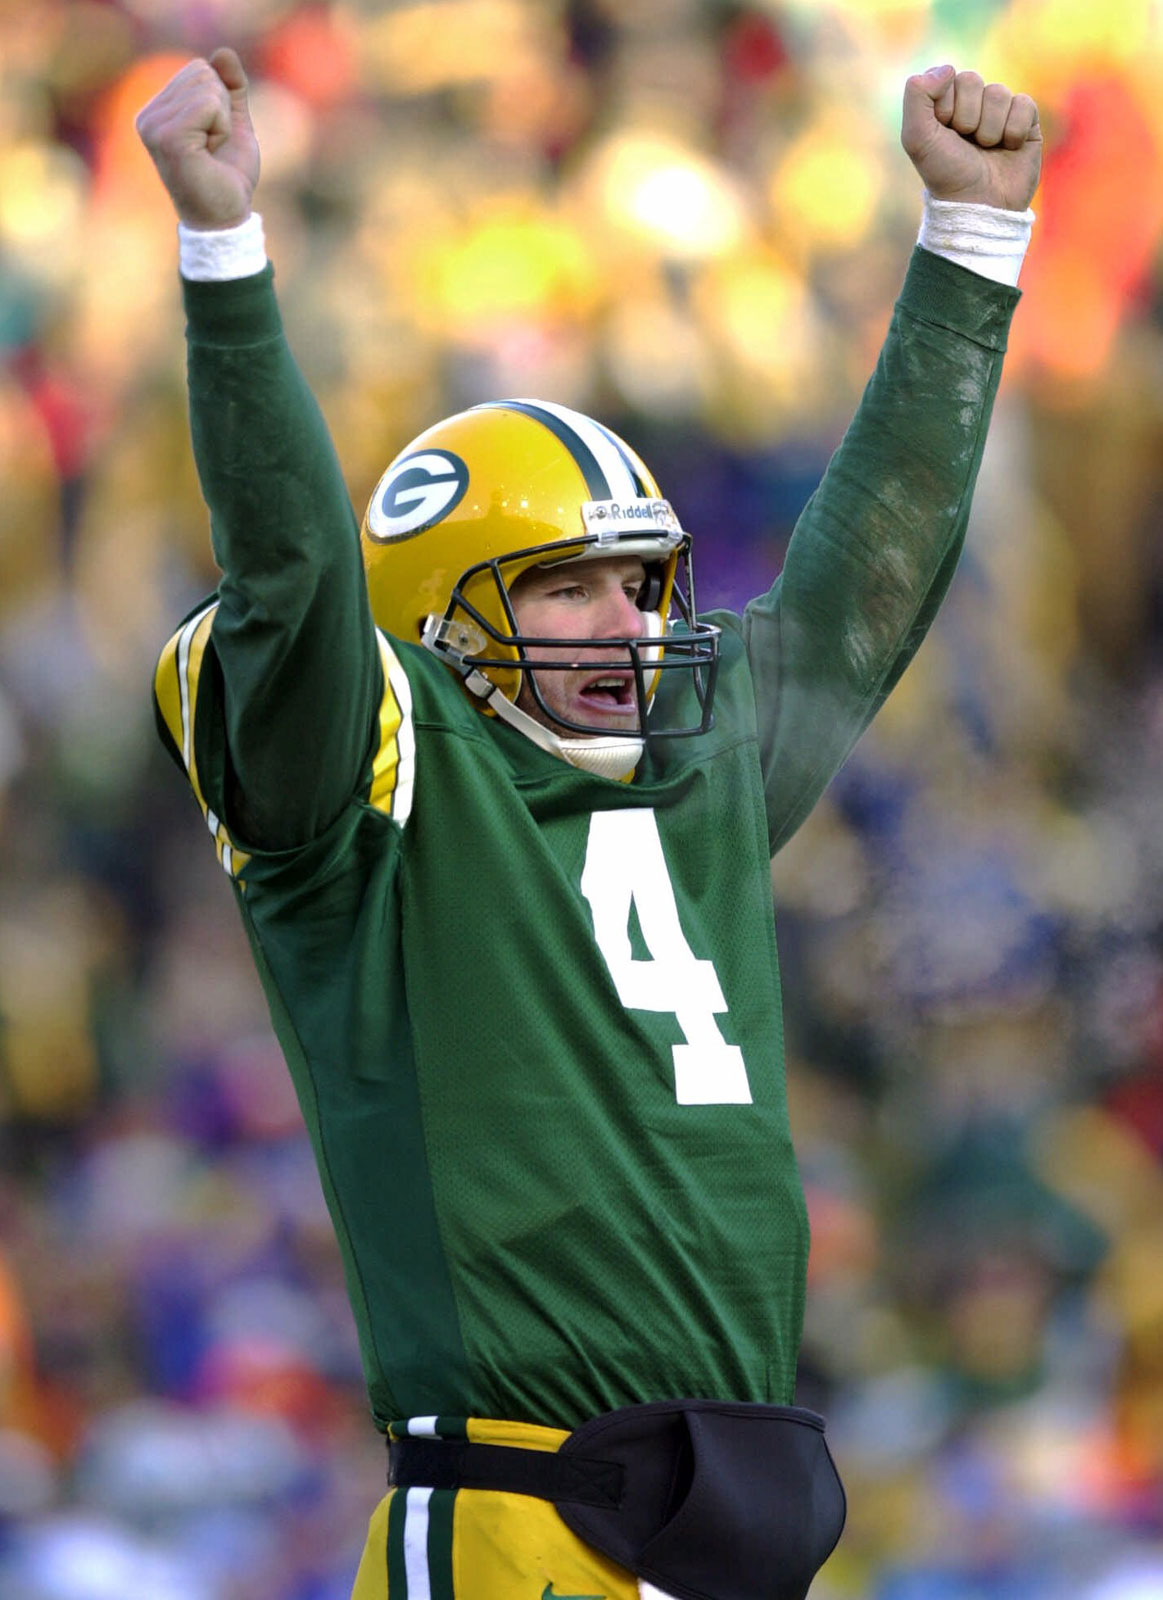 PODCAST | Playing Through Pain with Brett Favre, Pro Football Hall of Fame